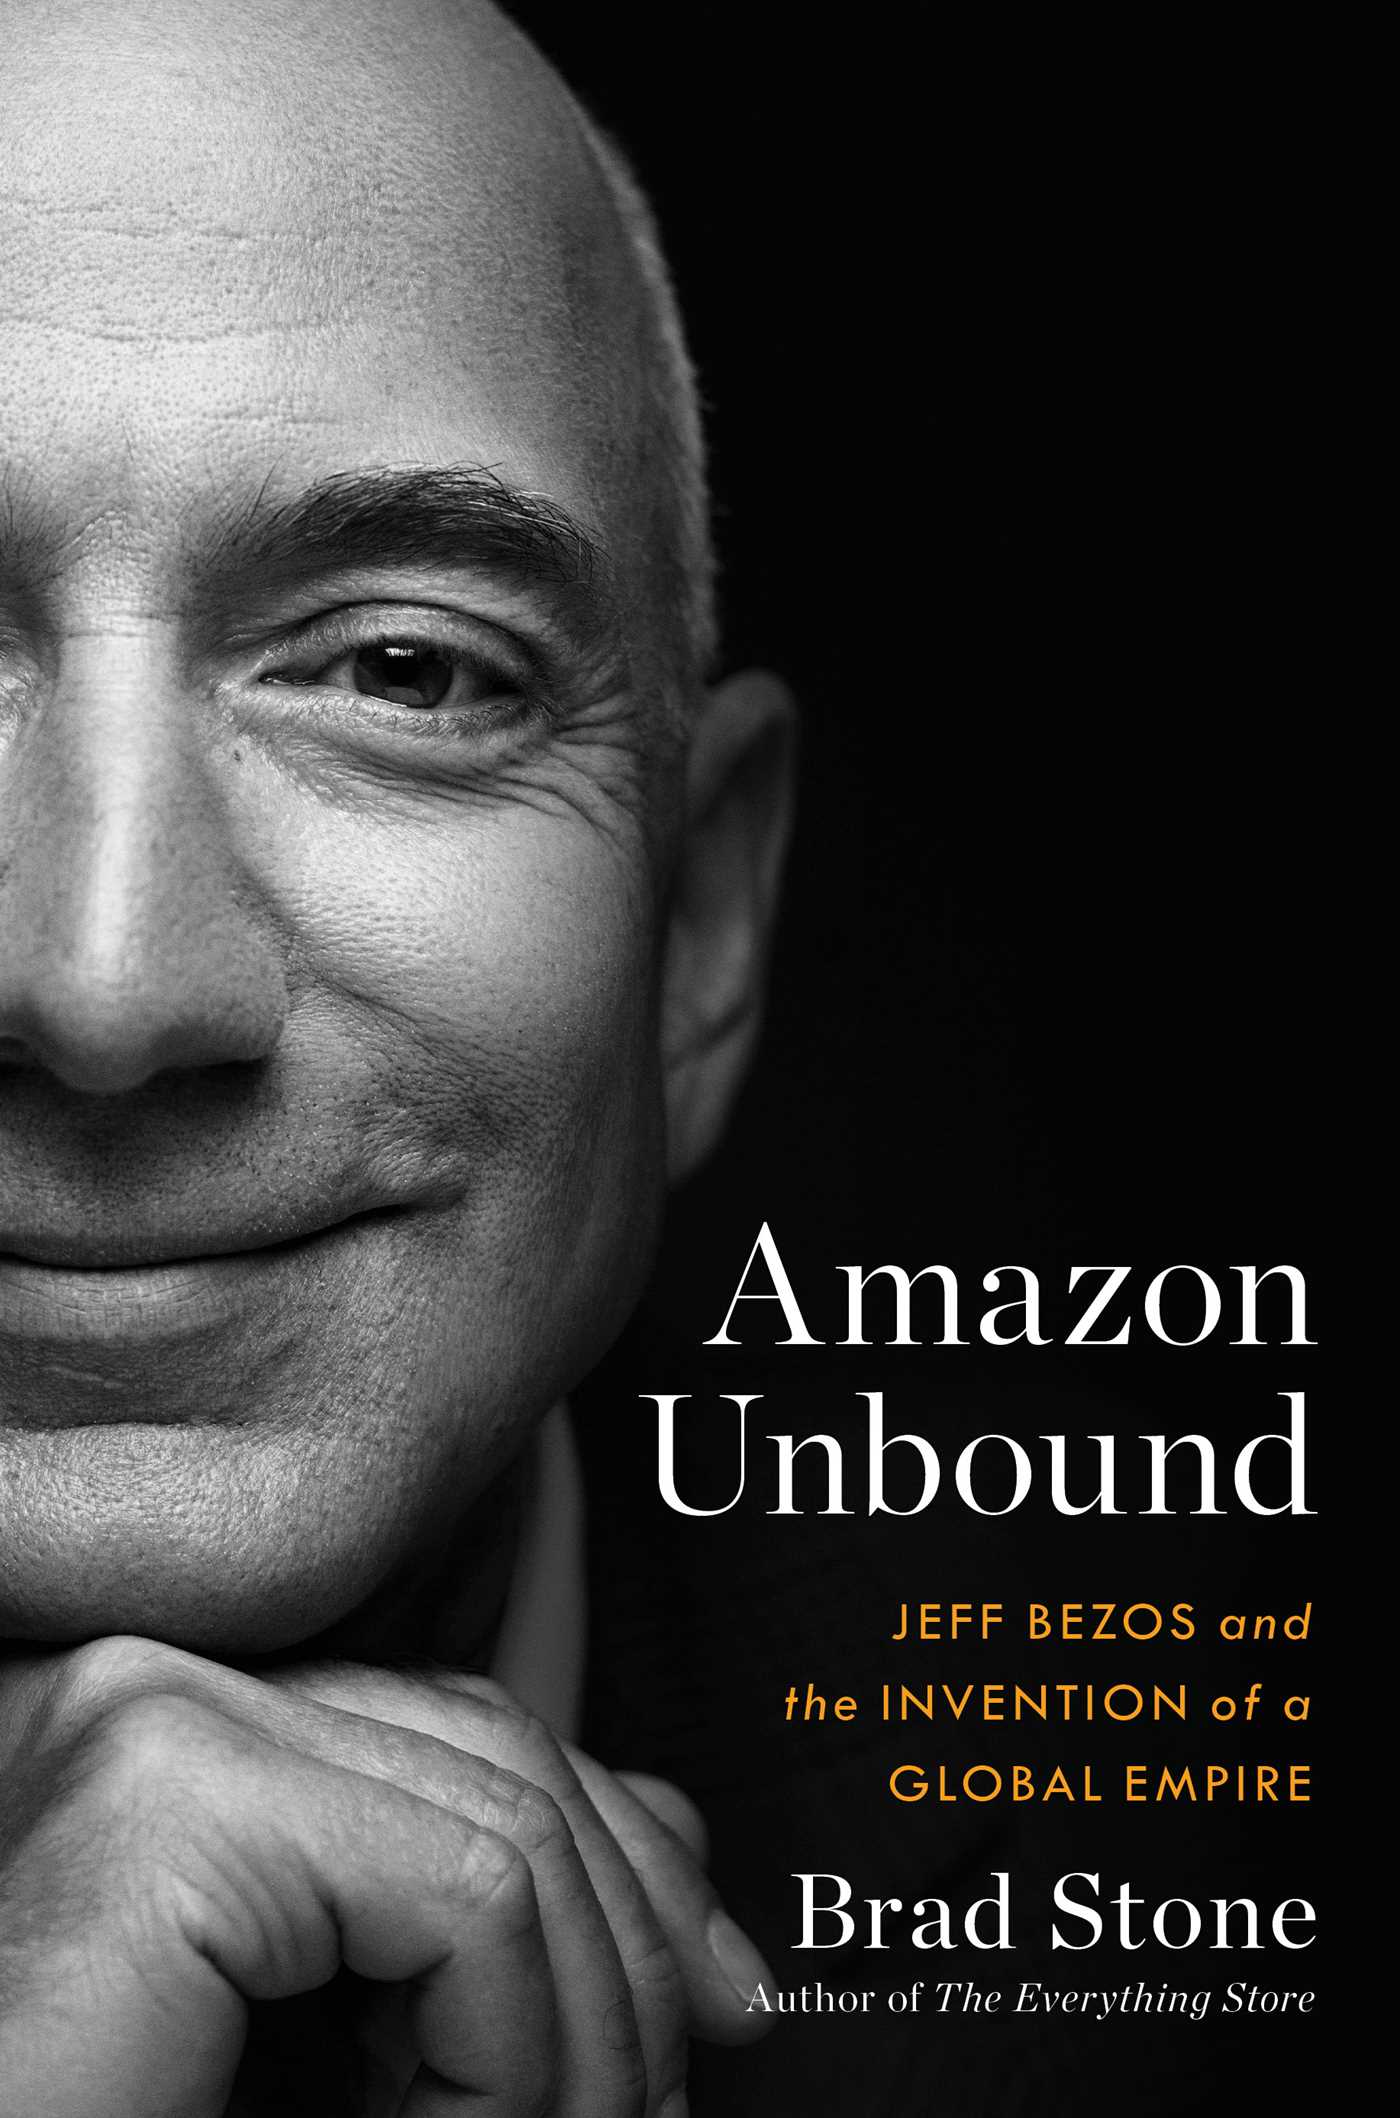 [EPUB] Amazon Unbound: Jeff Bezos and the Invention of a Global Empire by Brad Stone